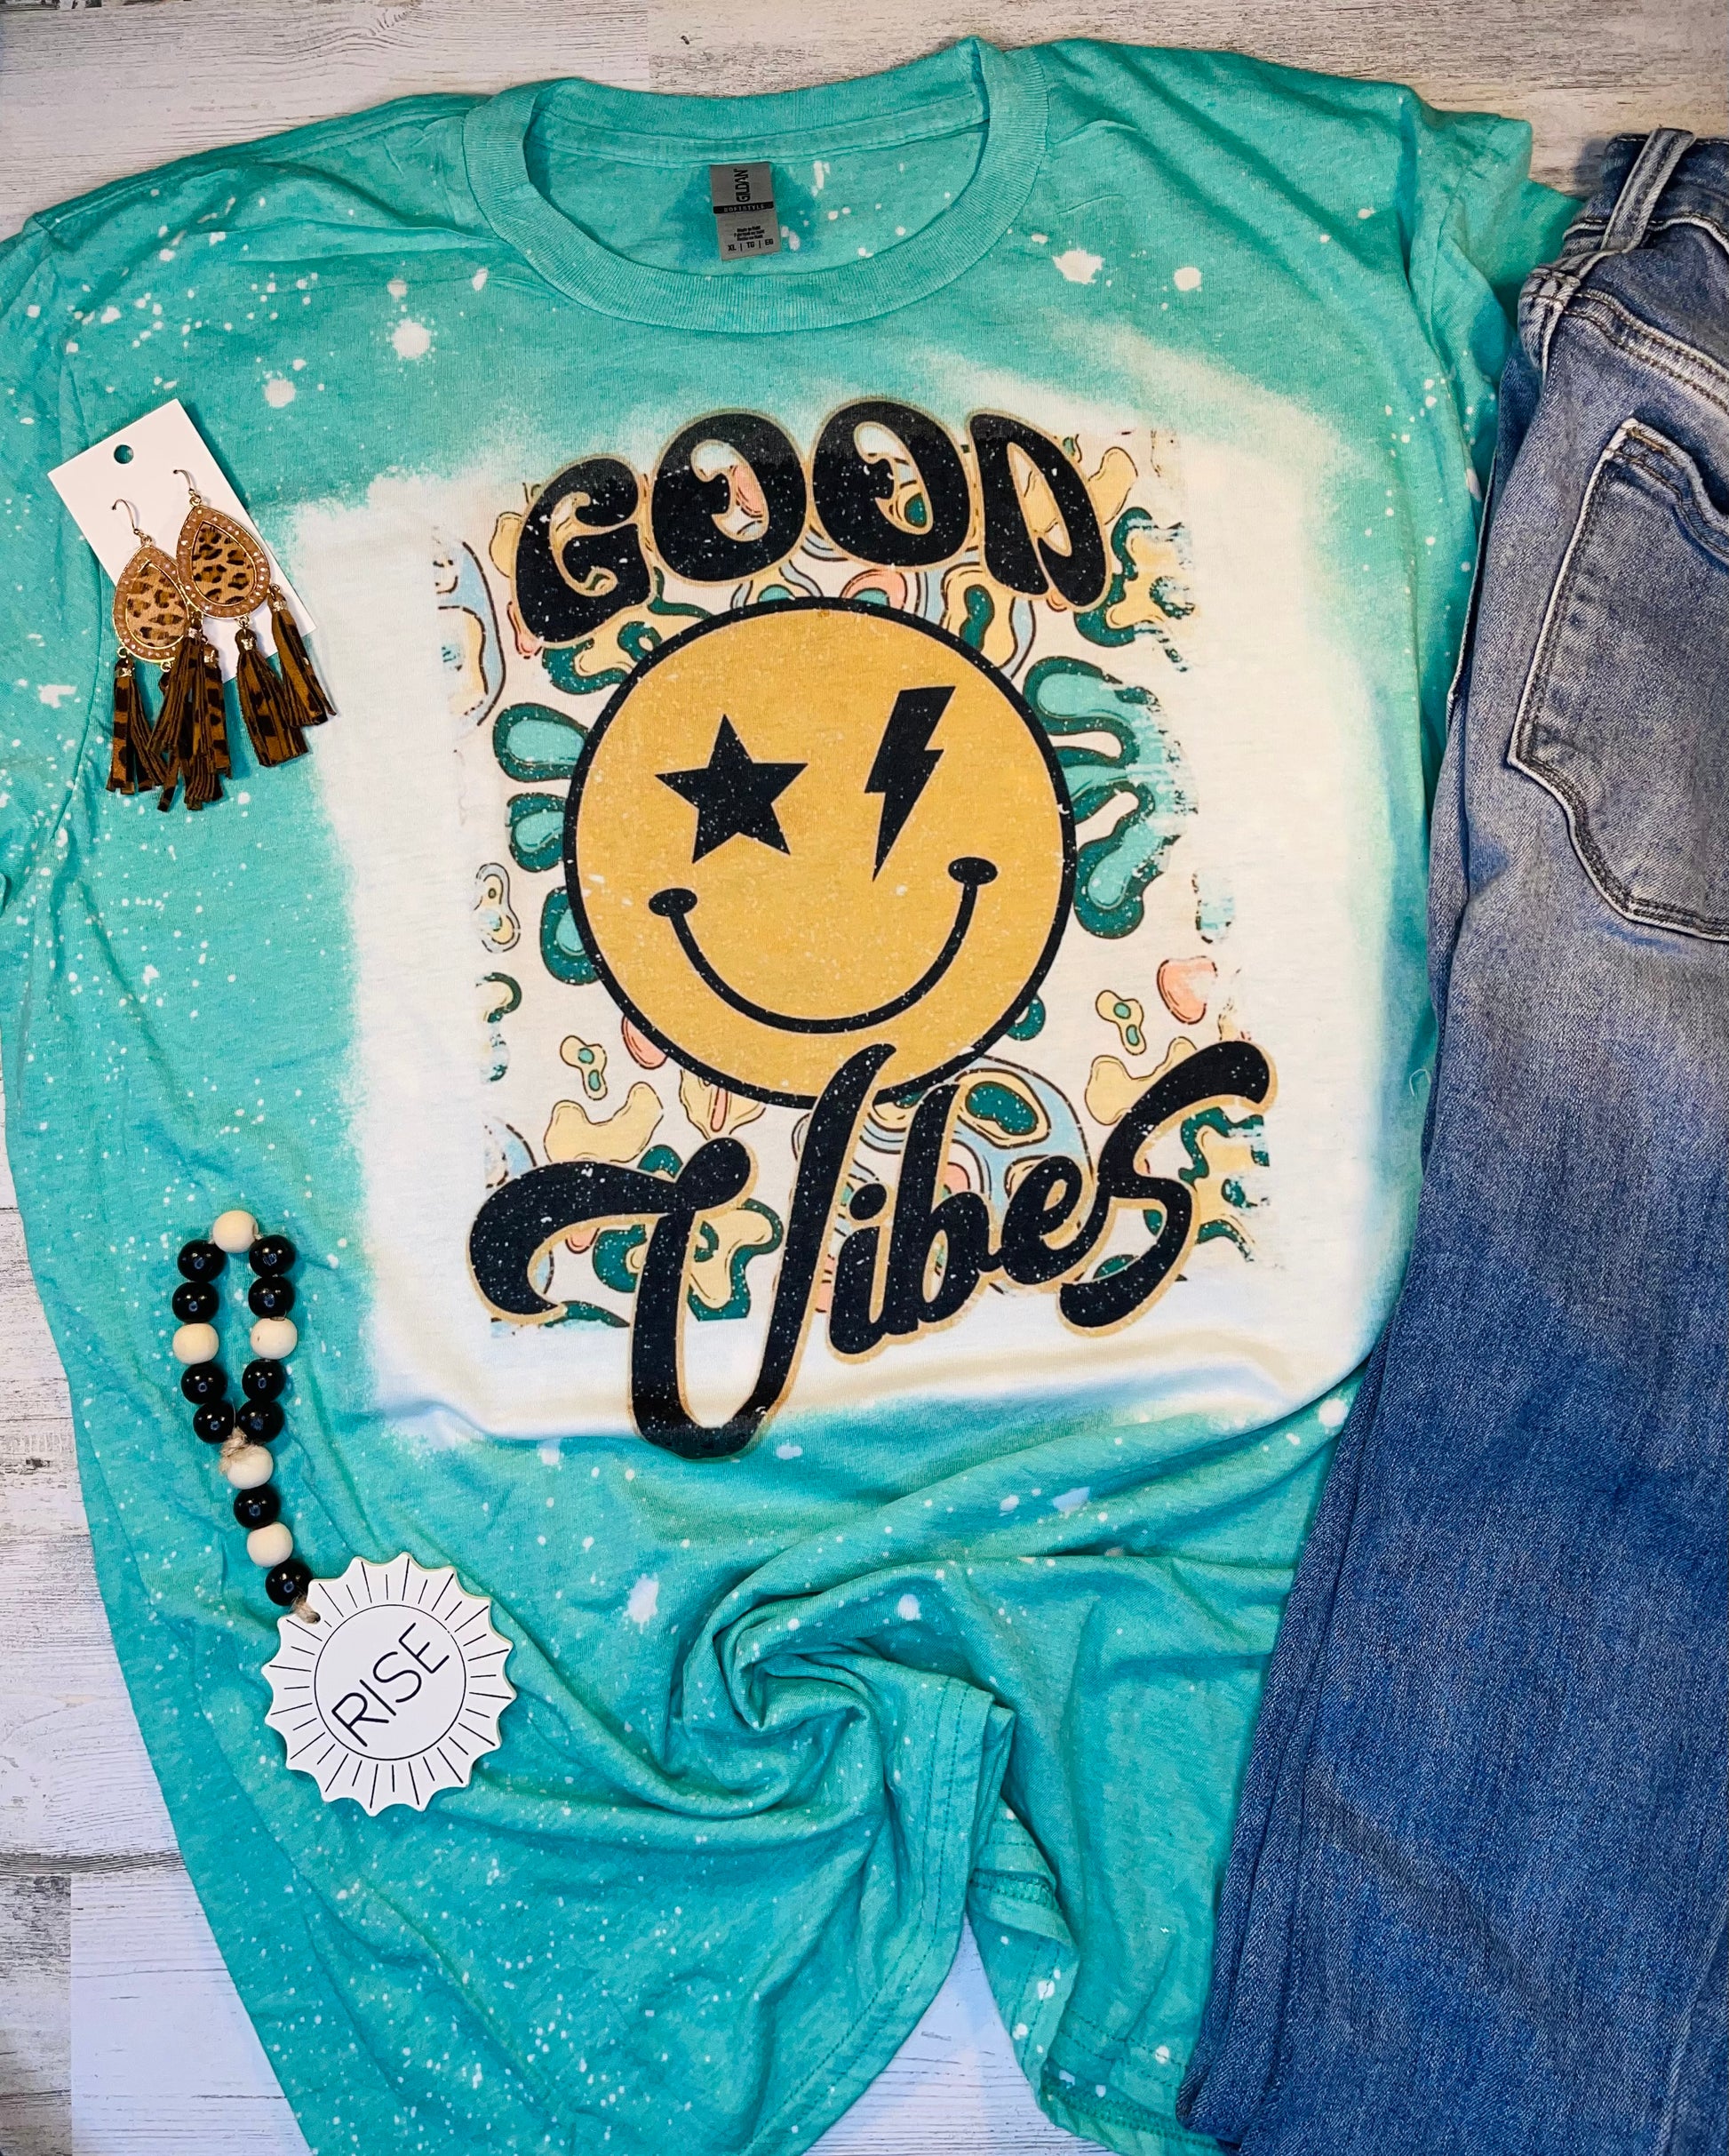 Product details  Custom sublimated tee that reads “Good vibes" Pressed on a soft style gildan shirt Short sleeve  Fits true to size Contact us about a custom color shirt.   *Colors may vary slightly due to monitor resolution and lighting* Southern Bliss Boutique